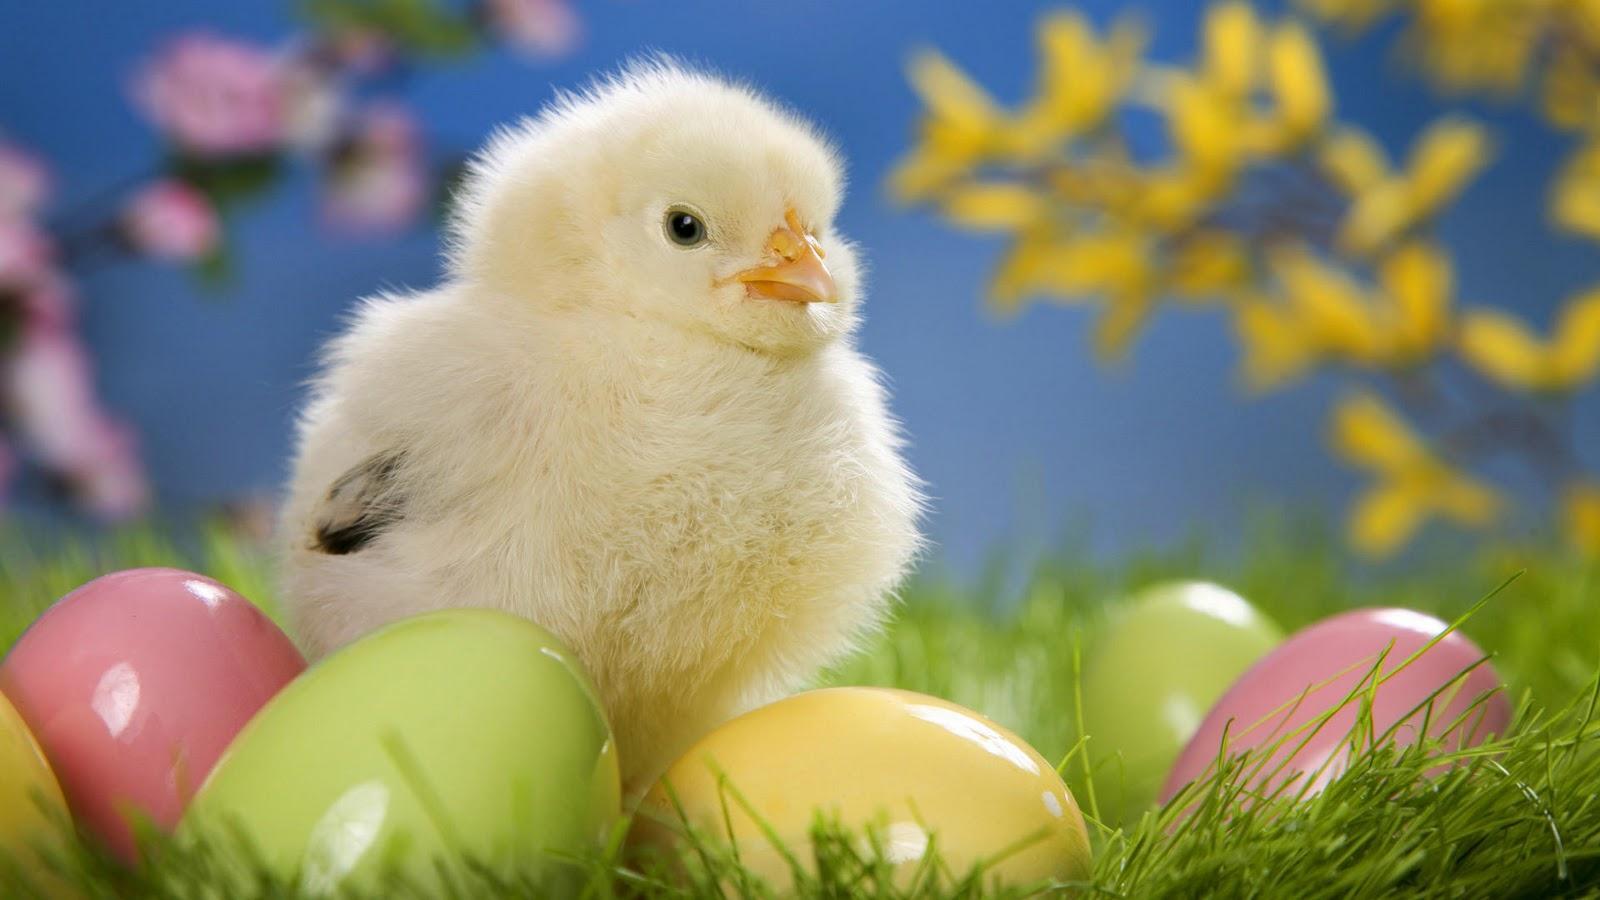 Cute Hen Chick with Colorful Eggs Wallpaper